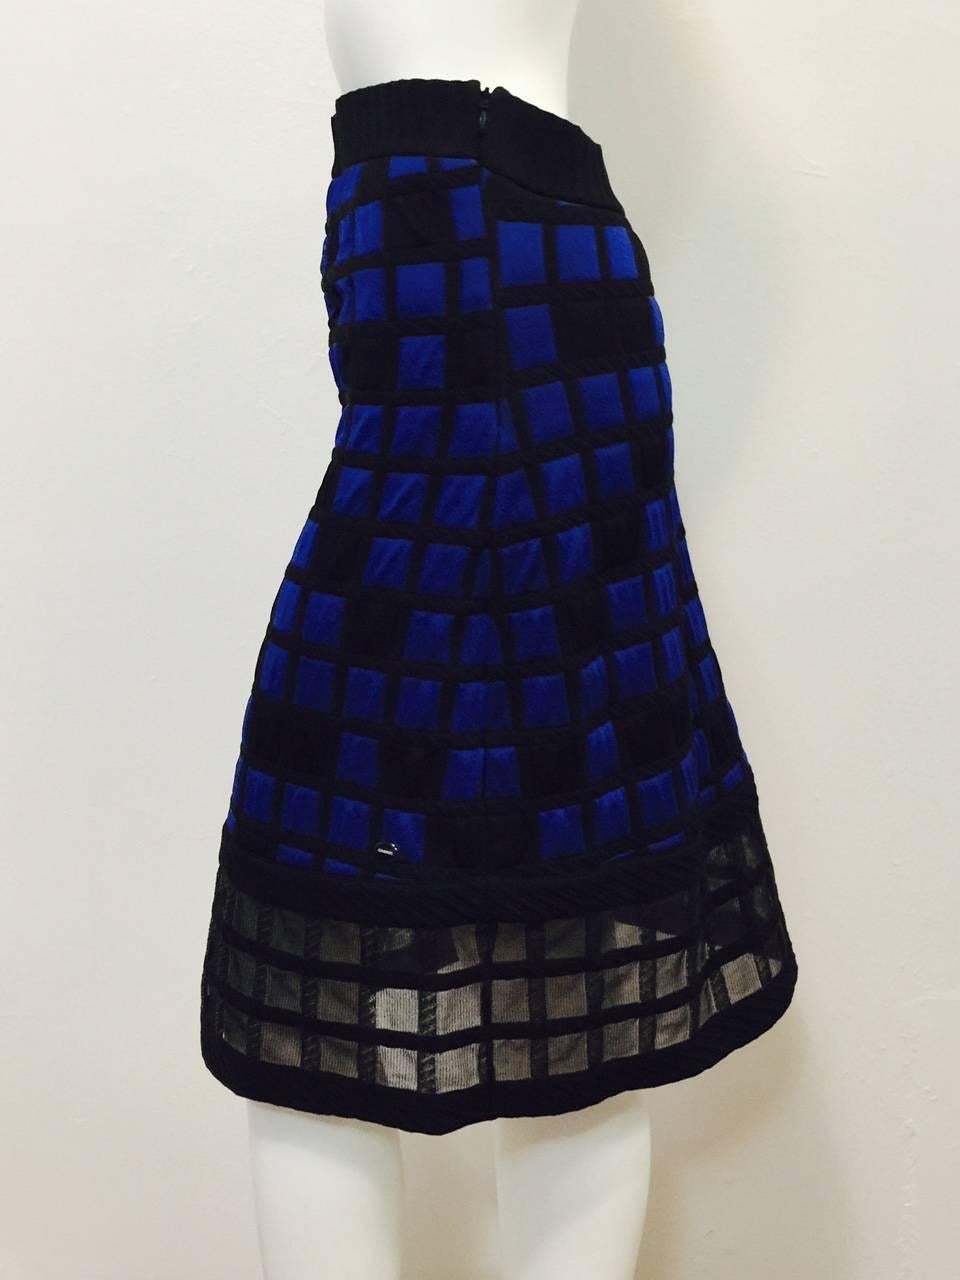 Chanel Colorblocked Quilted Skirt is as modern as Coco herself!  Features classic A-line silhouette rendered in luxurious, technologically advanced quilted black and royal blue fabric  Squares and rectangles all over are perfectly complemented by